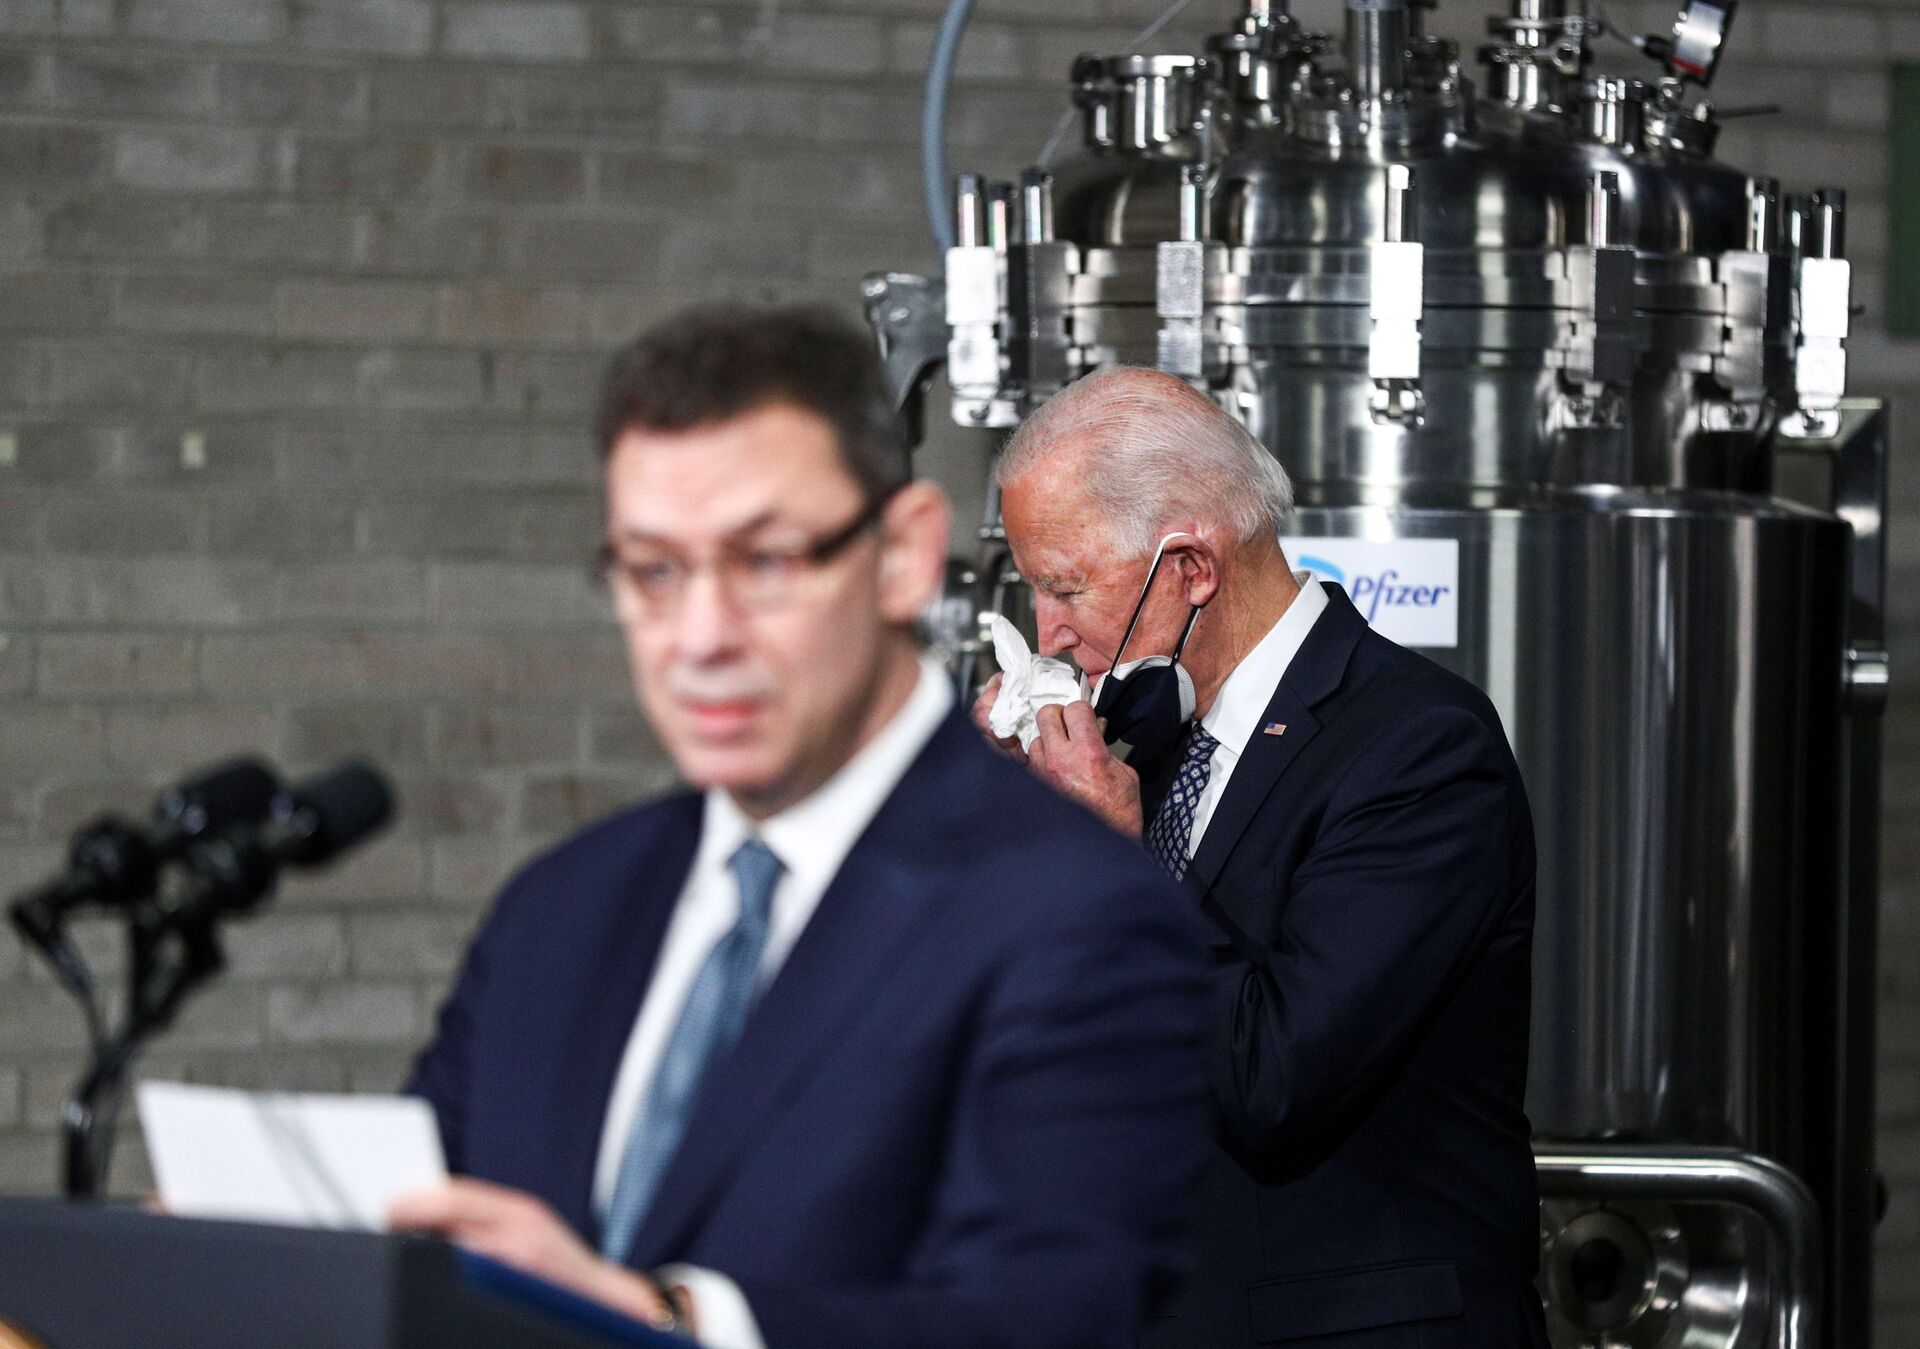 U.S. President Joe Biden removes his face mask to speak while being introduced by Pfizer CEO Albert Bourla during a tours of a Pfizer manufacturing plant producing the coronavirus disease (COVID-19) vaccine in Kalamazoo, Michigan, U.S., February 19, 2021 - Sputnik International, 1920, 28.09.2021